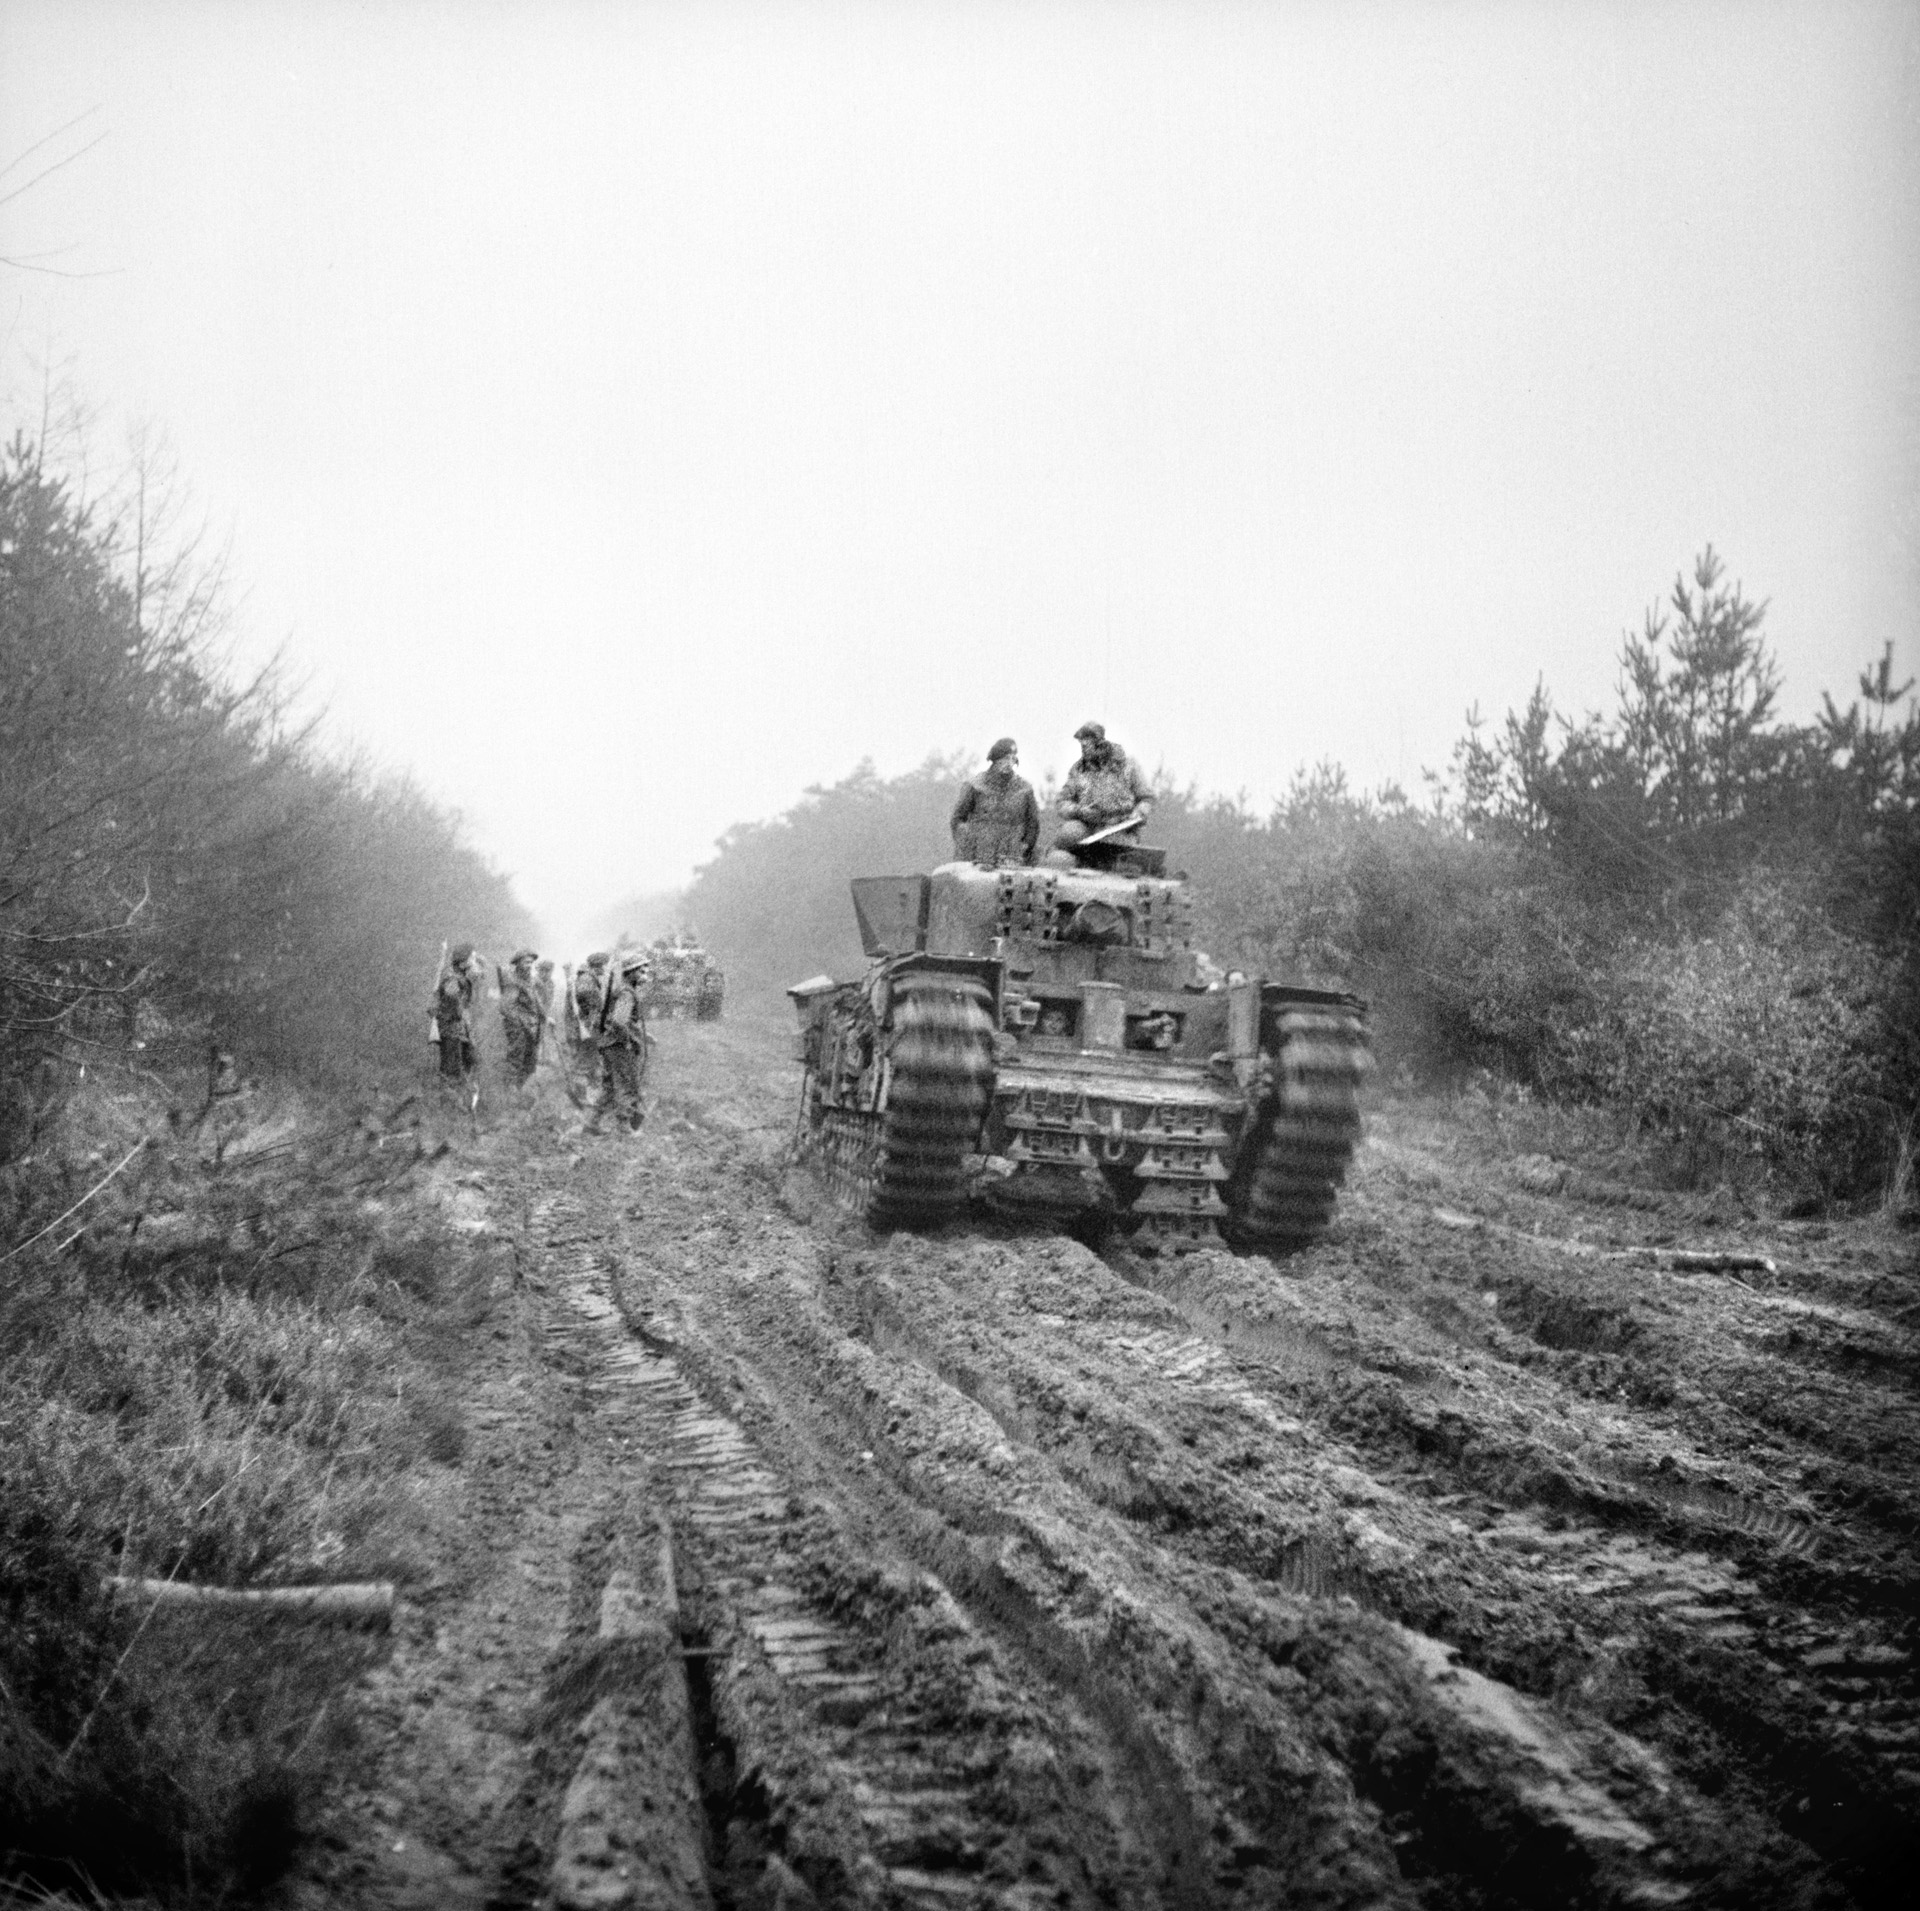 A British Churchill tank powers its way through thick mud along a forest road in the Reichswald at the start of Operation Veritable on February 8, 1945. Behind the tank, sappers of the 45th Division are attempting to strengthen the road, making it more passable for light vehicles.